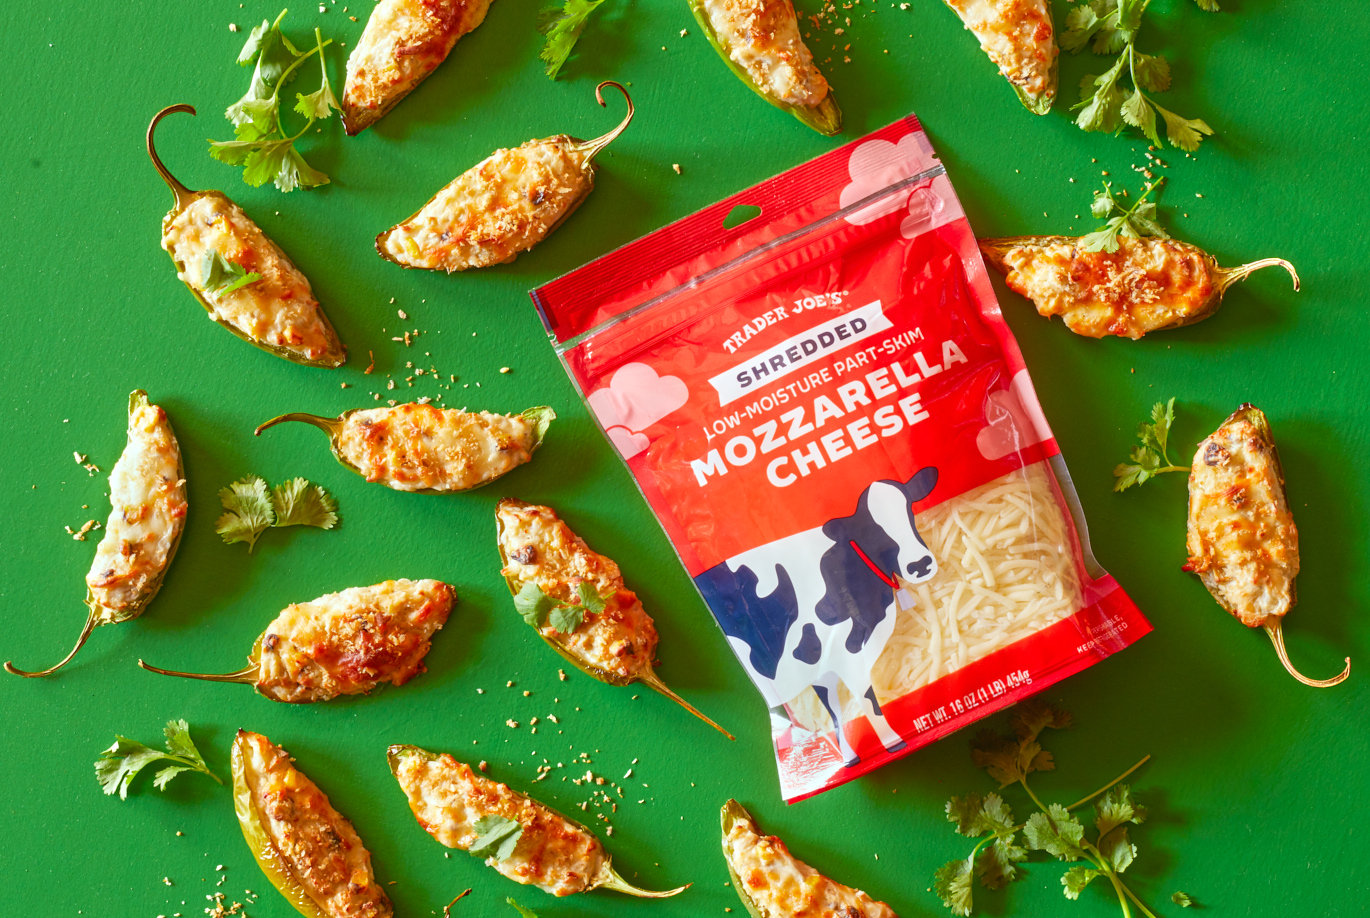 Trader Joe's Shredded Mozzarella Cheese; used in recipe for JalapeÃ±o Corn Kick Poppers; on green surface, jalapeÃ±o poppers surrounding package